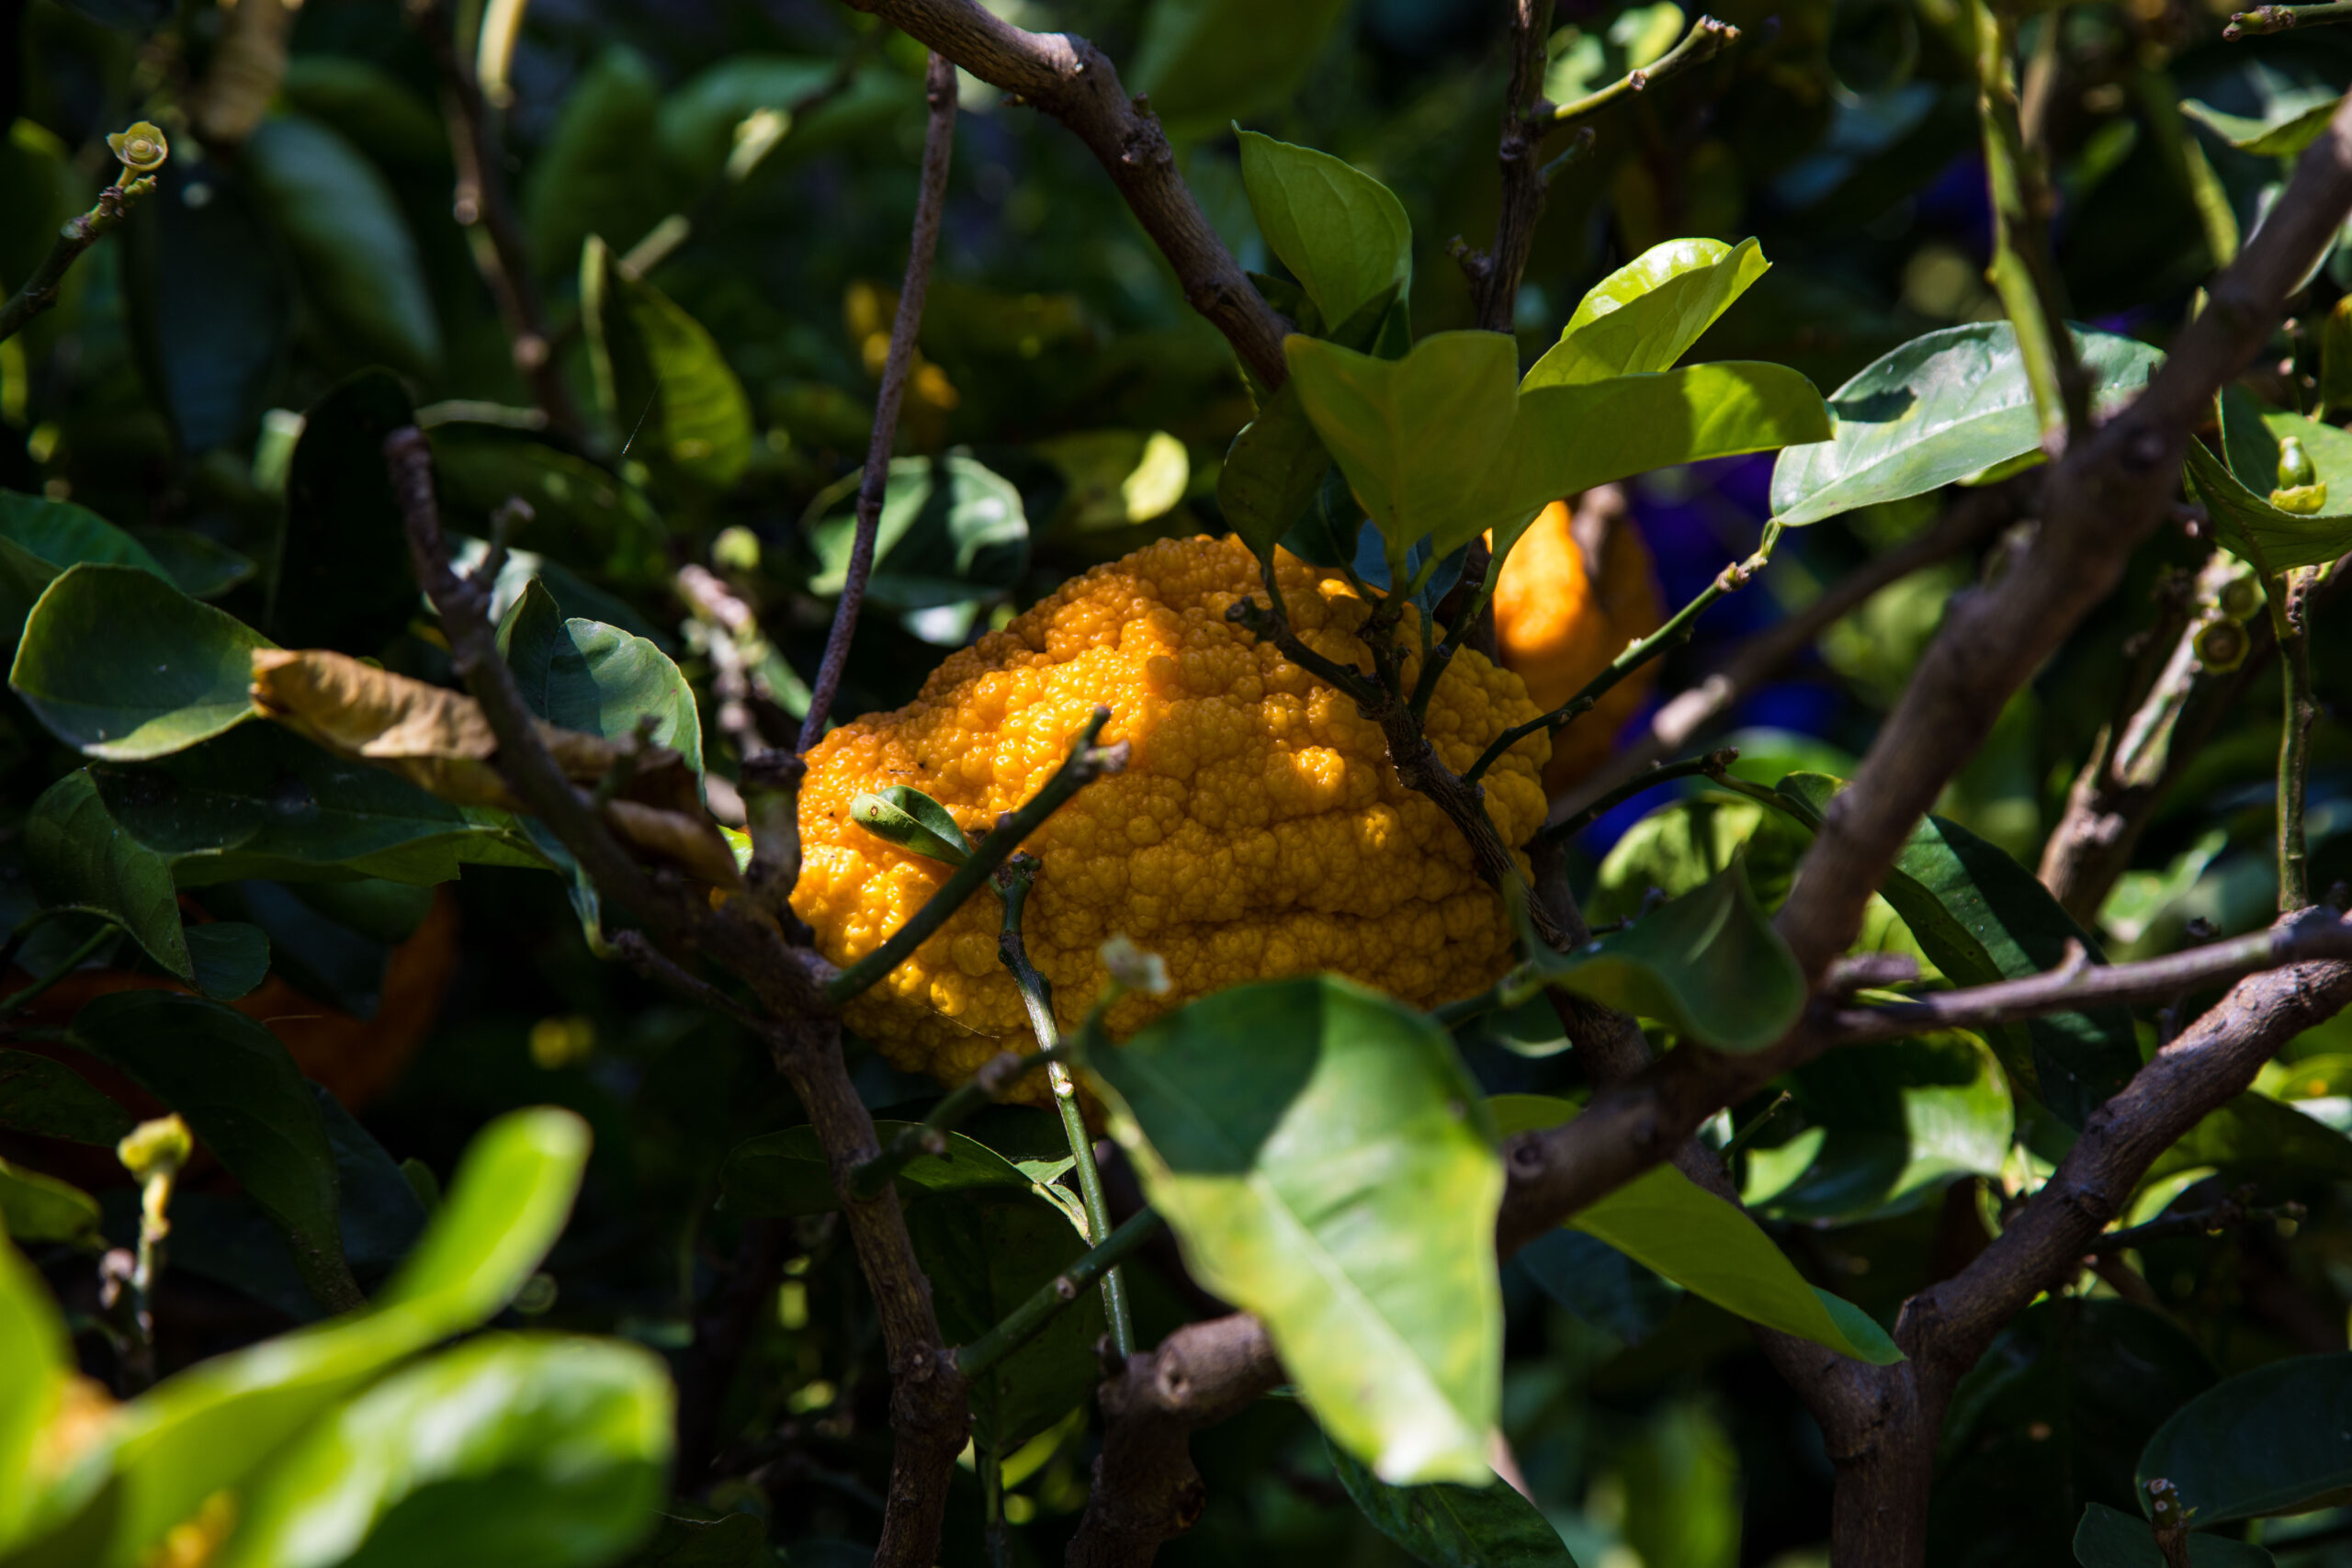 Citrus fruit on the Isole Borromee, over 400 years of history